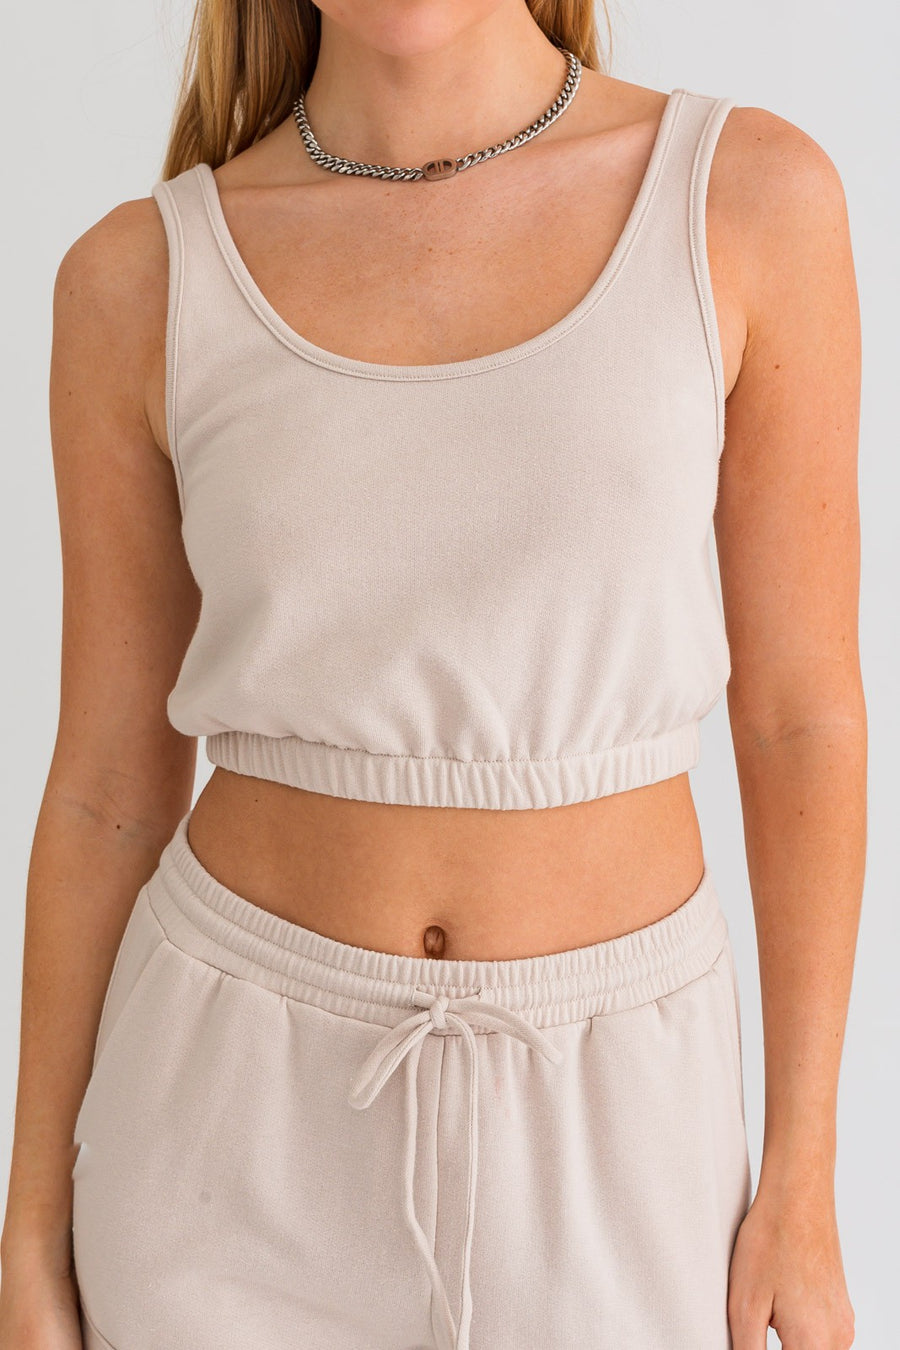 Cropped tank top with waistband in the color cream.